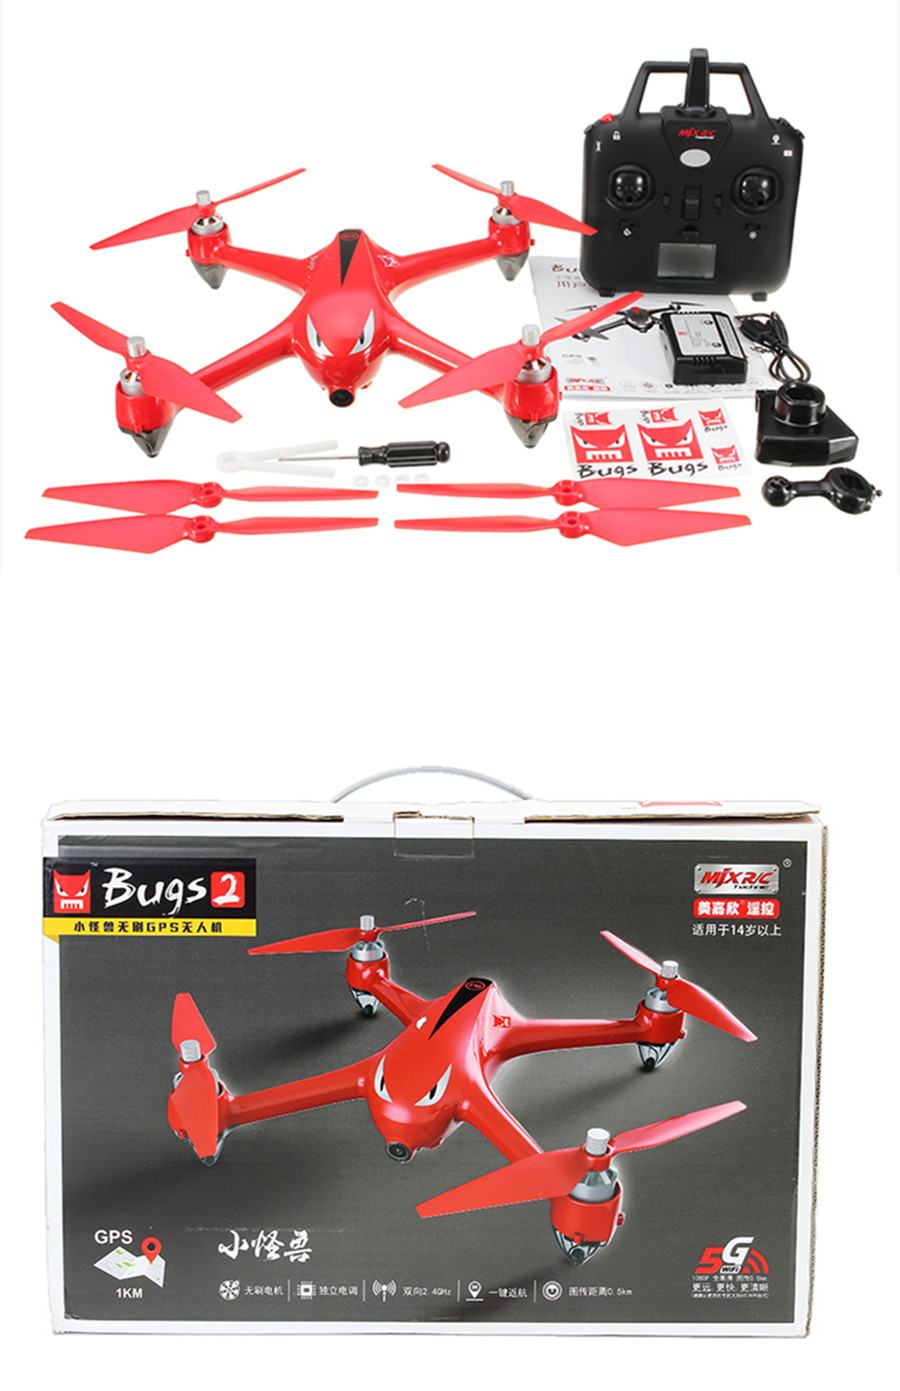 MJX B2W Bugs 2W Monster Brushless 5G WiFi FPV With 1080P HD Camera GPS RC Quadcopter RTF - Photo: 9